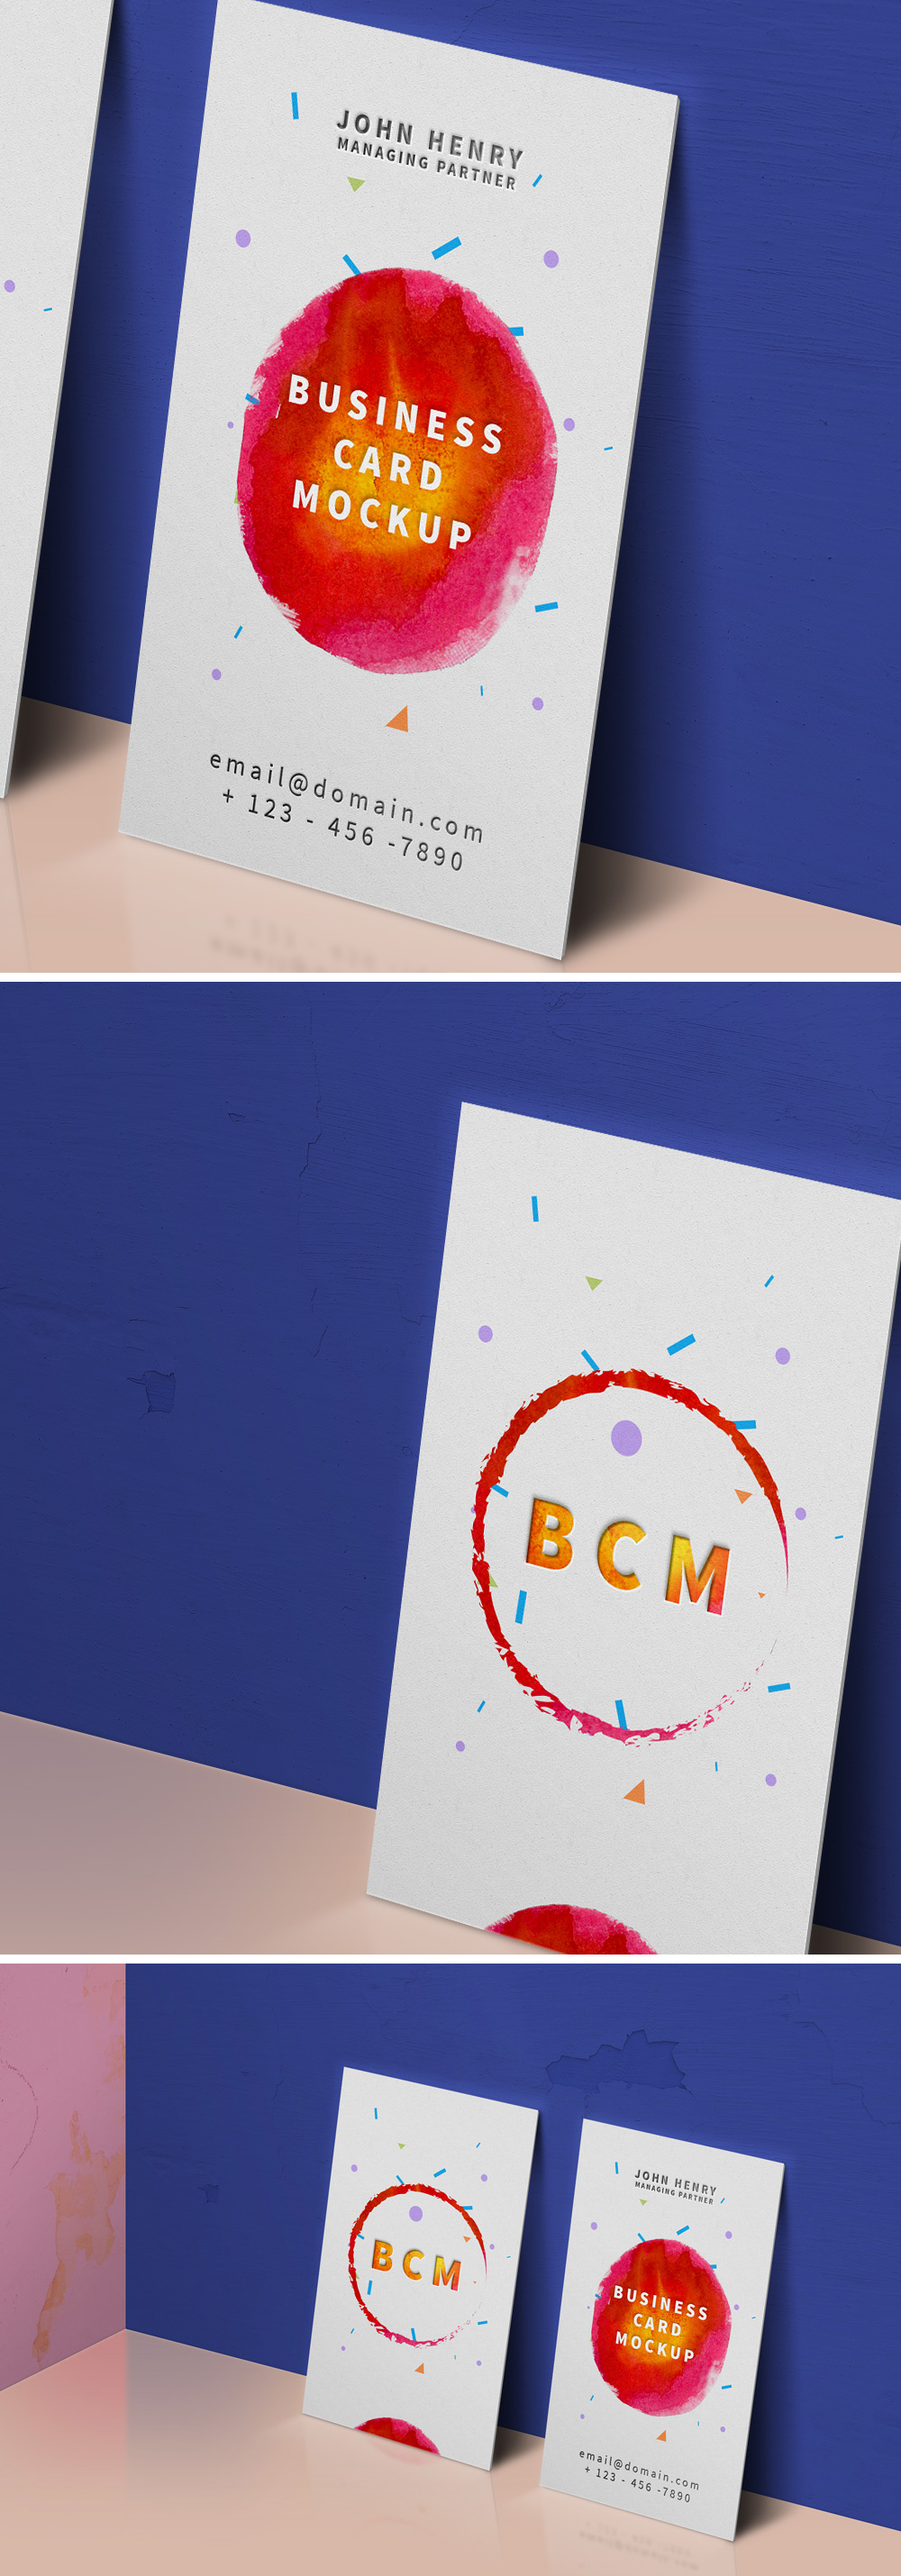 standing-business-cards-psd